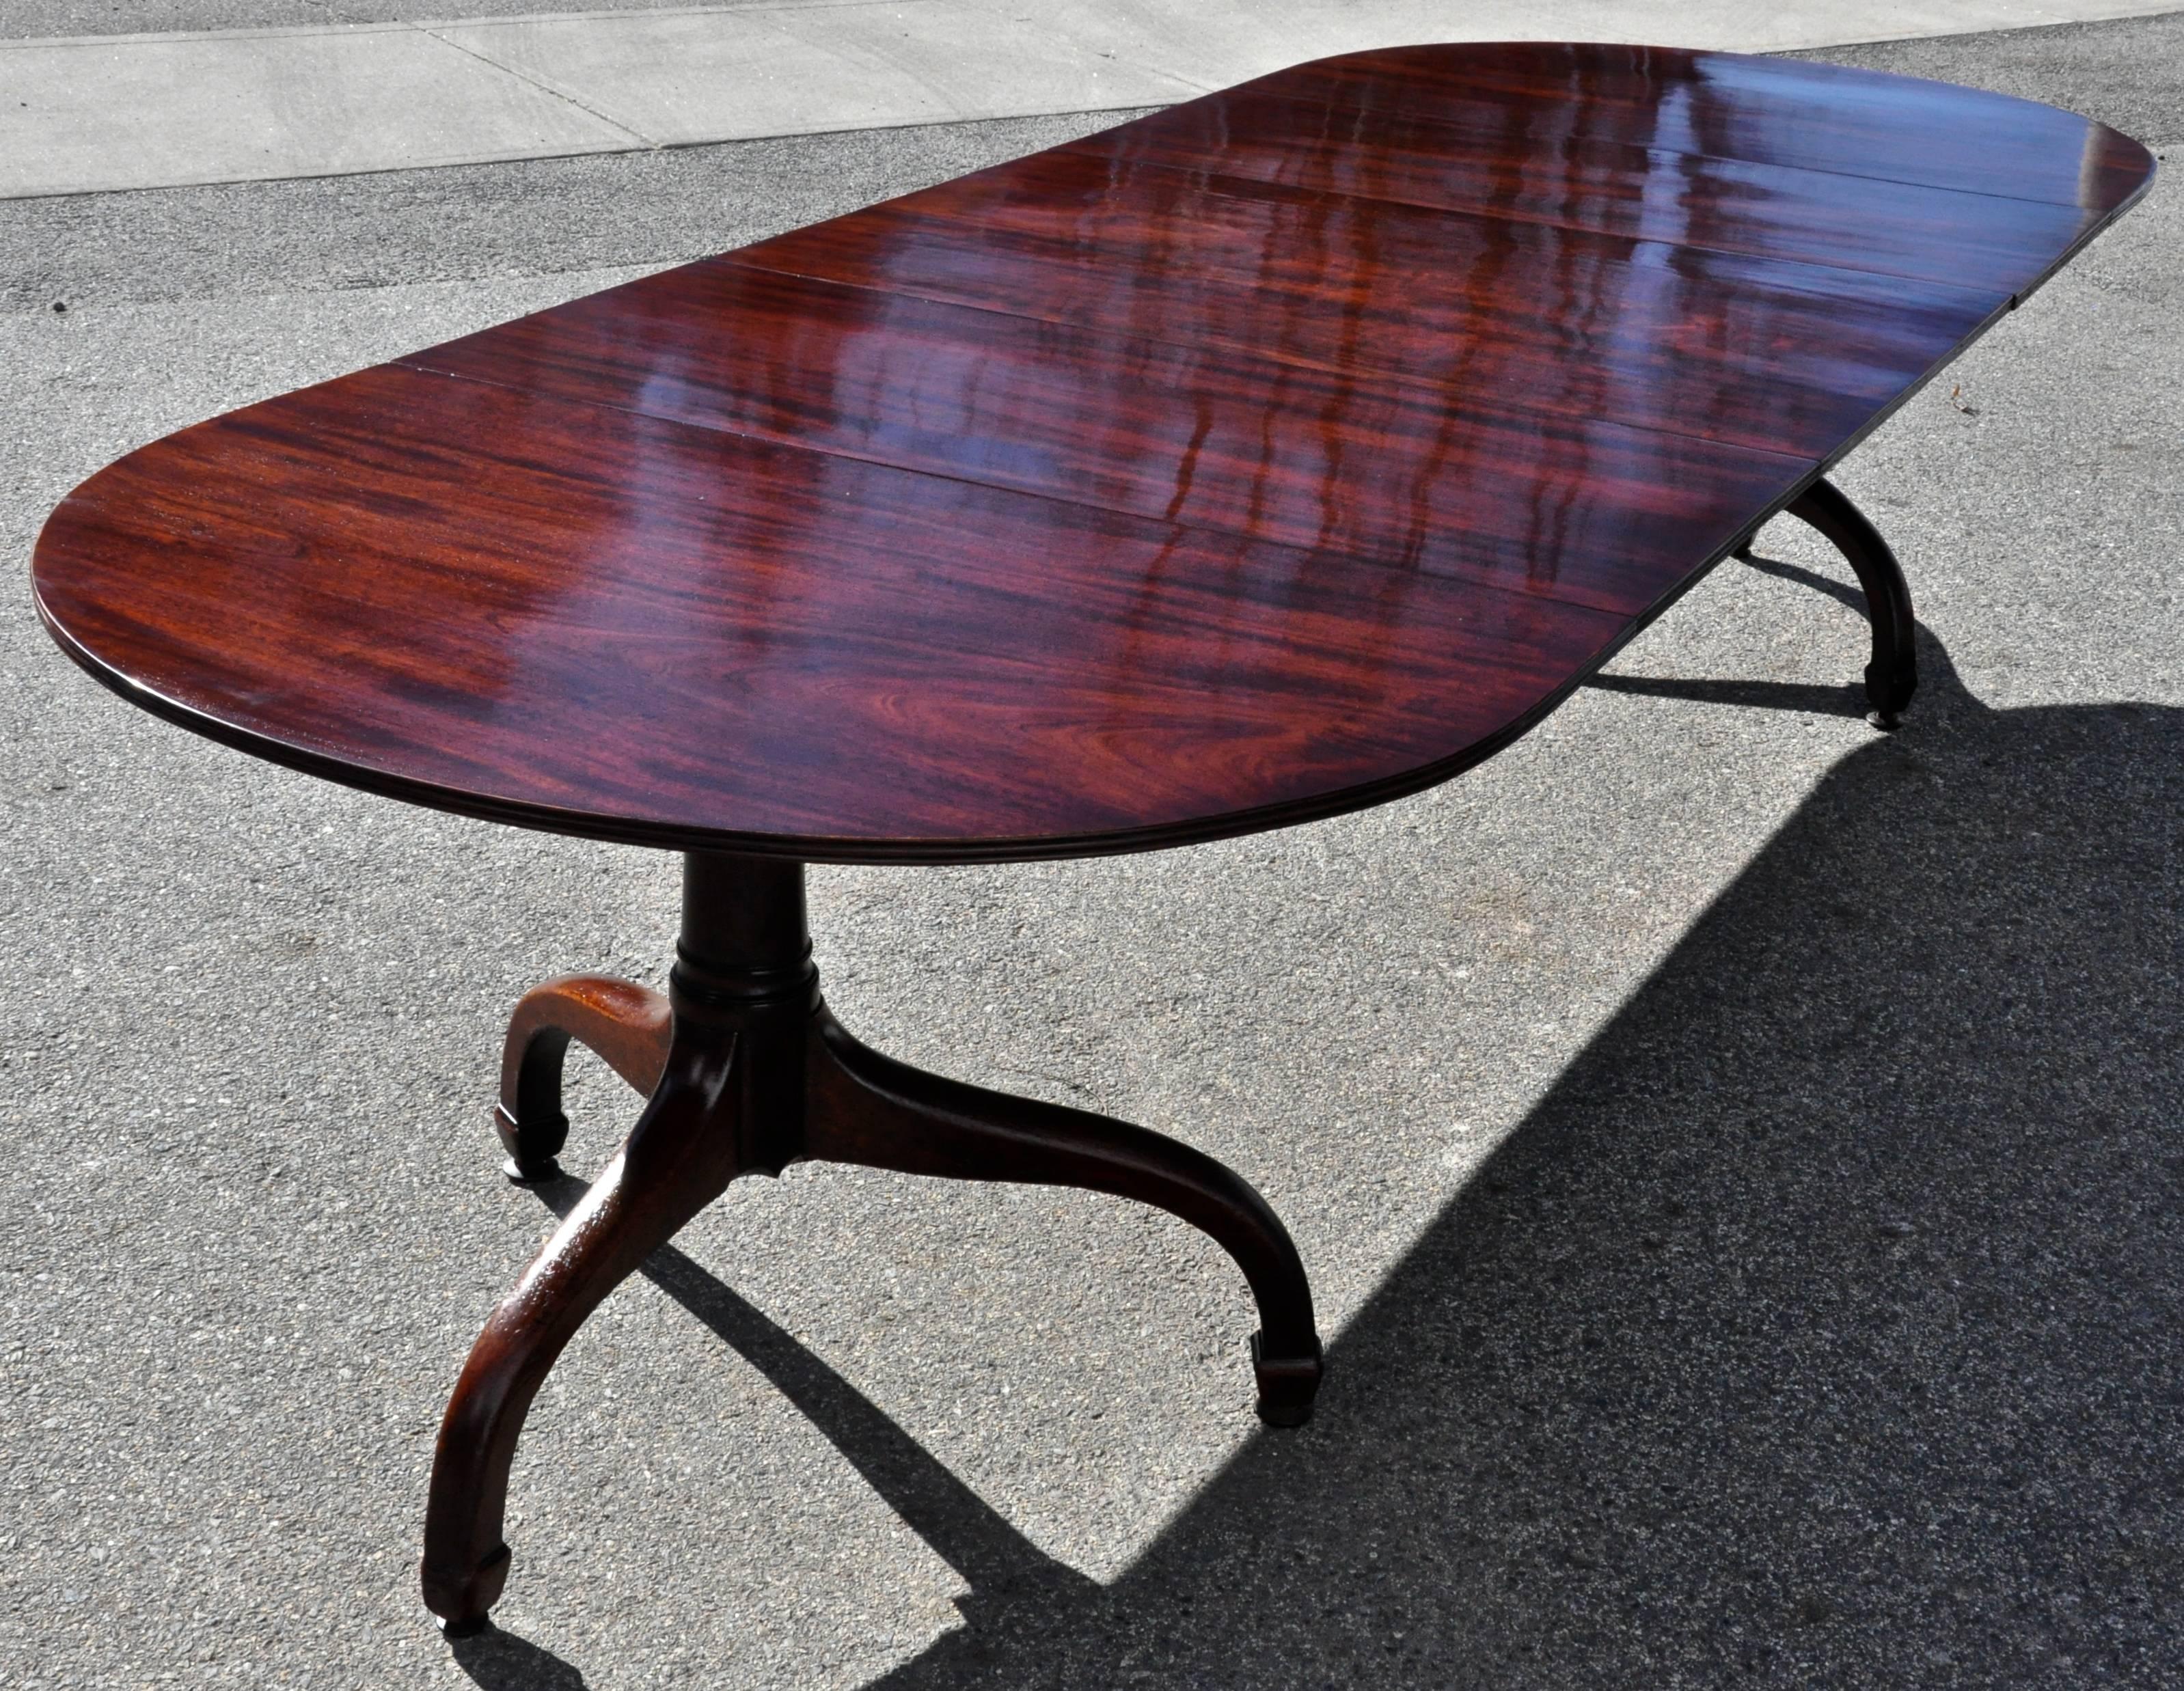 Period Cuban mahogany dining table, early 19th century

Beautiful figuring
Two pedestals with three leaves
Rare "Spider Leg"
Removed from a Portsmouth, NH home
American Federal or English Regency / Georgian

Dimensions: fully